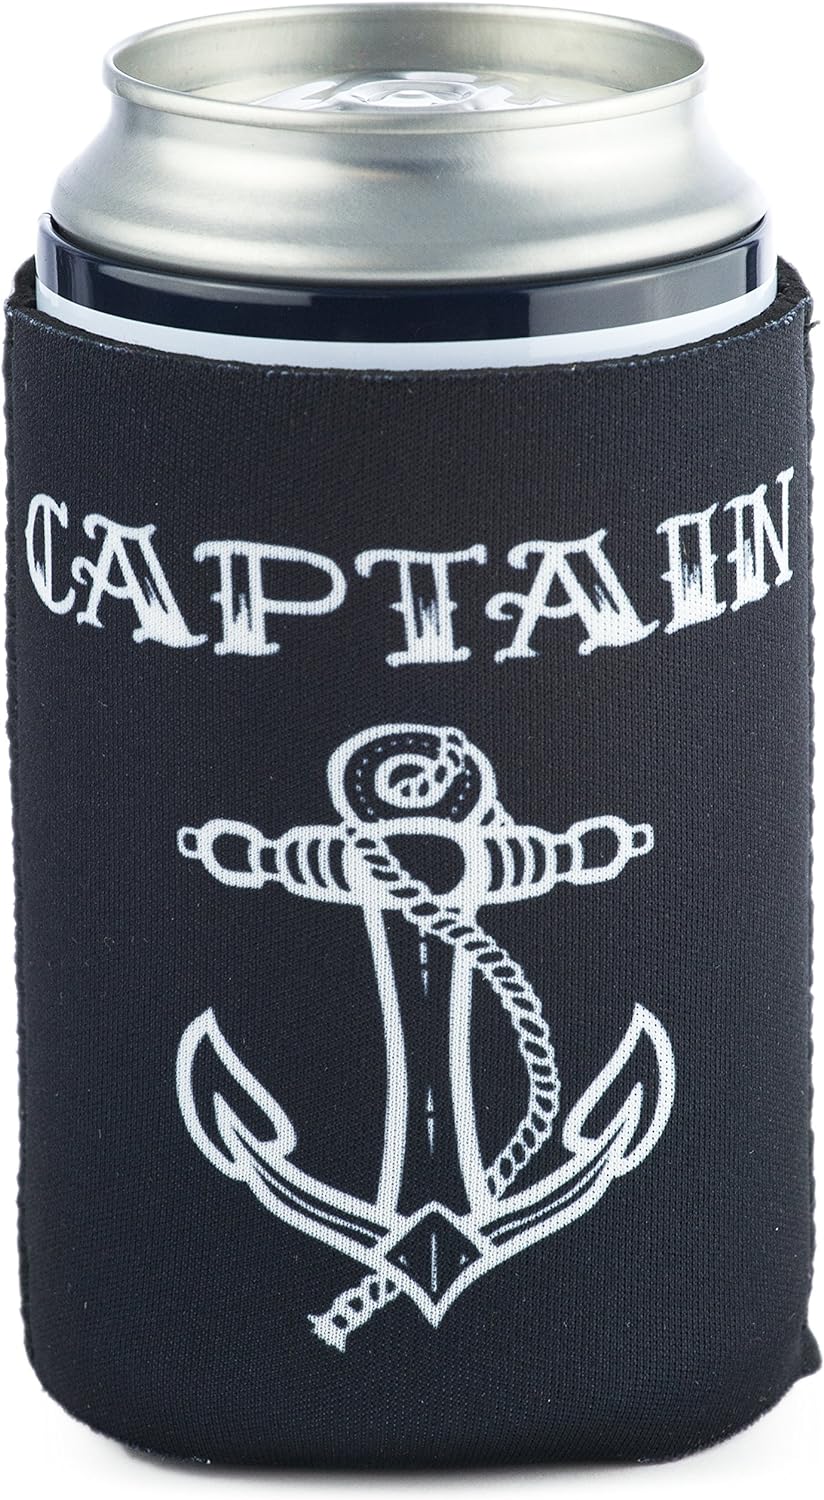 Captain Collapsible Neoprene Can Coolie - Ship's Wheel on Bottom - Drink Cooler